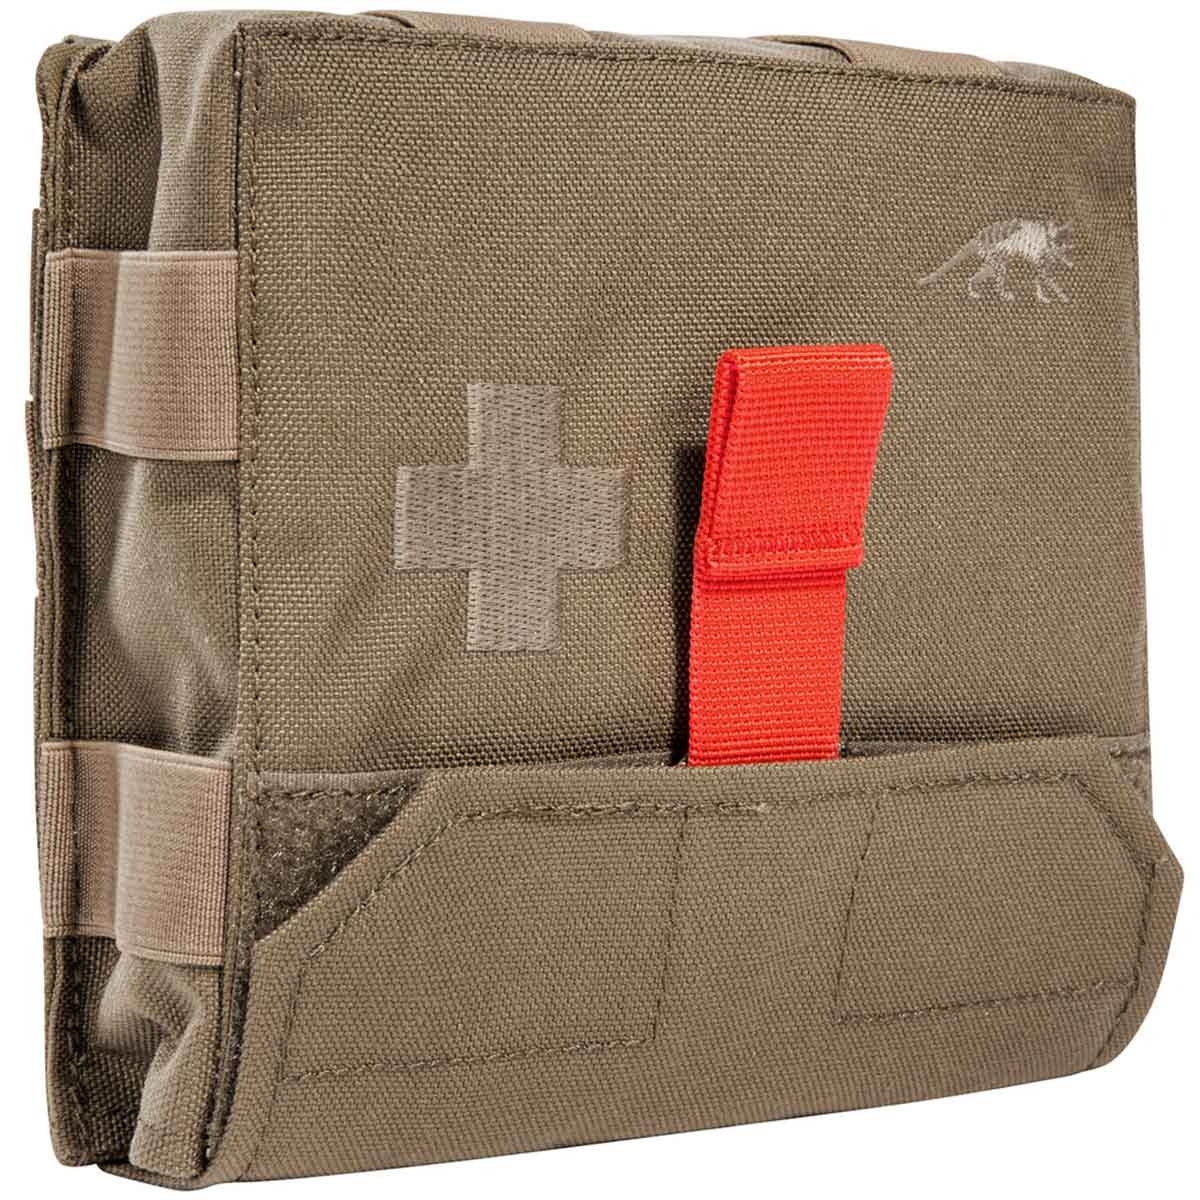 Apteczka Tasmanian Tiger IFAK Pouch S MKII First Aid Pouch - Coyote Brown